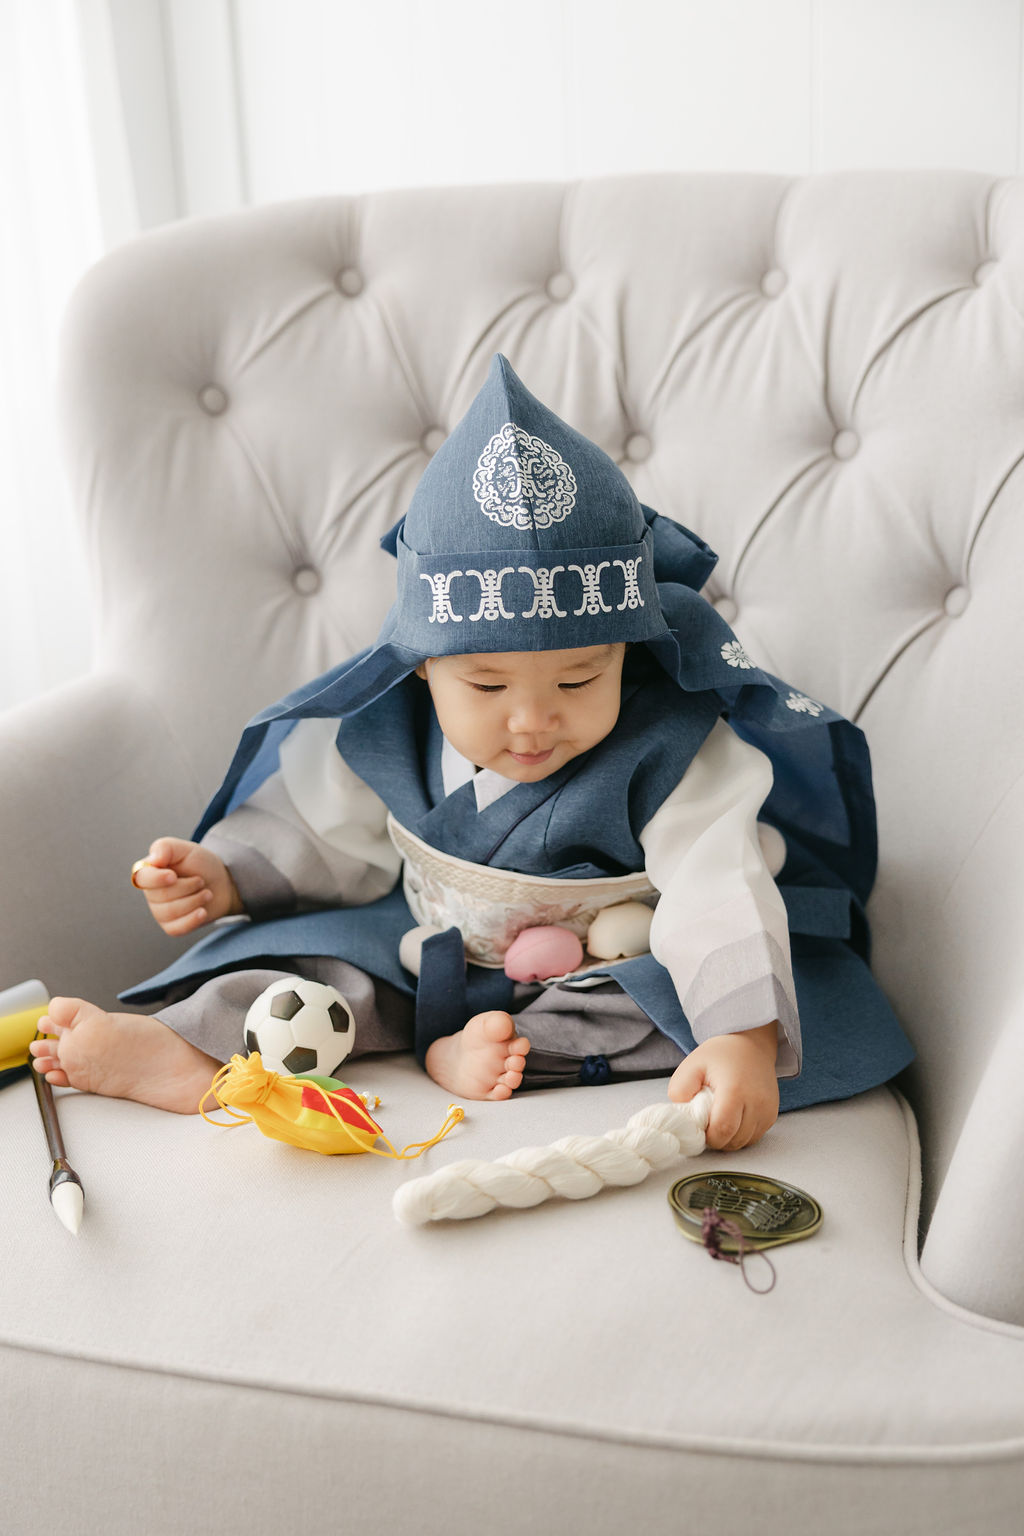 A young boy sits in a blue outfit surrounded by toys in a studio